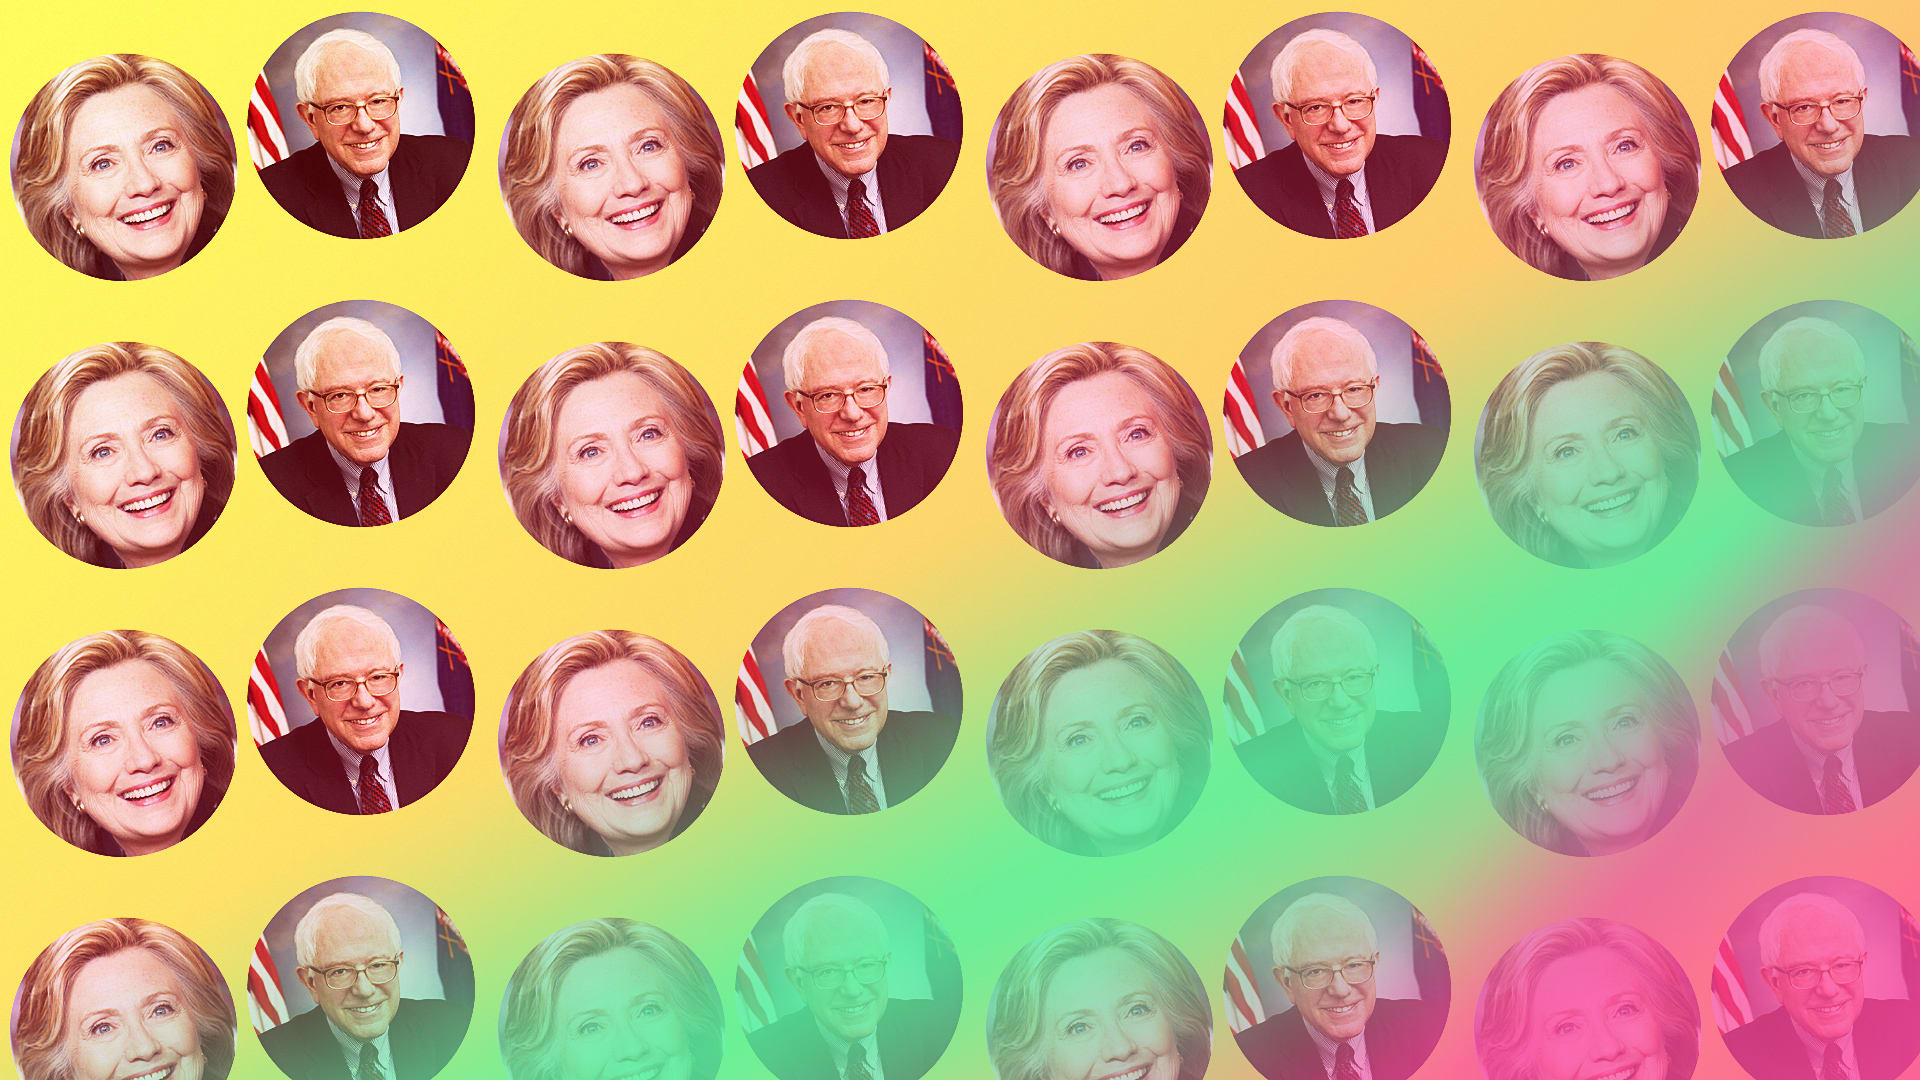 How Do Bernie Sanders And Hillary Clinton Compare On Women’s Issues?